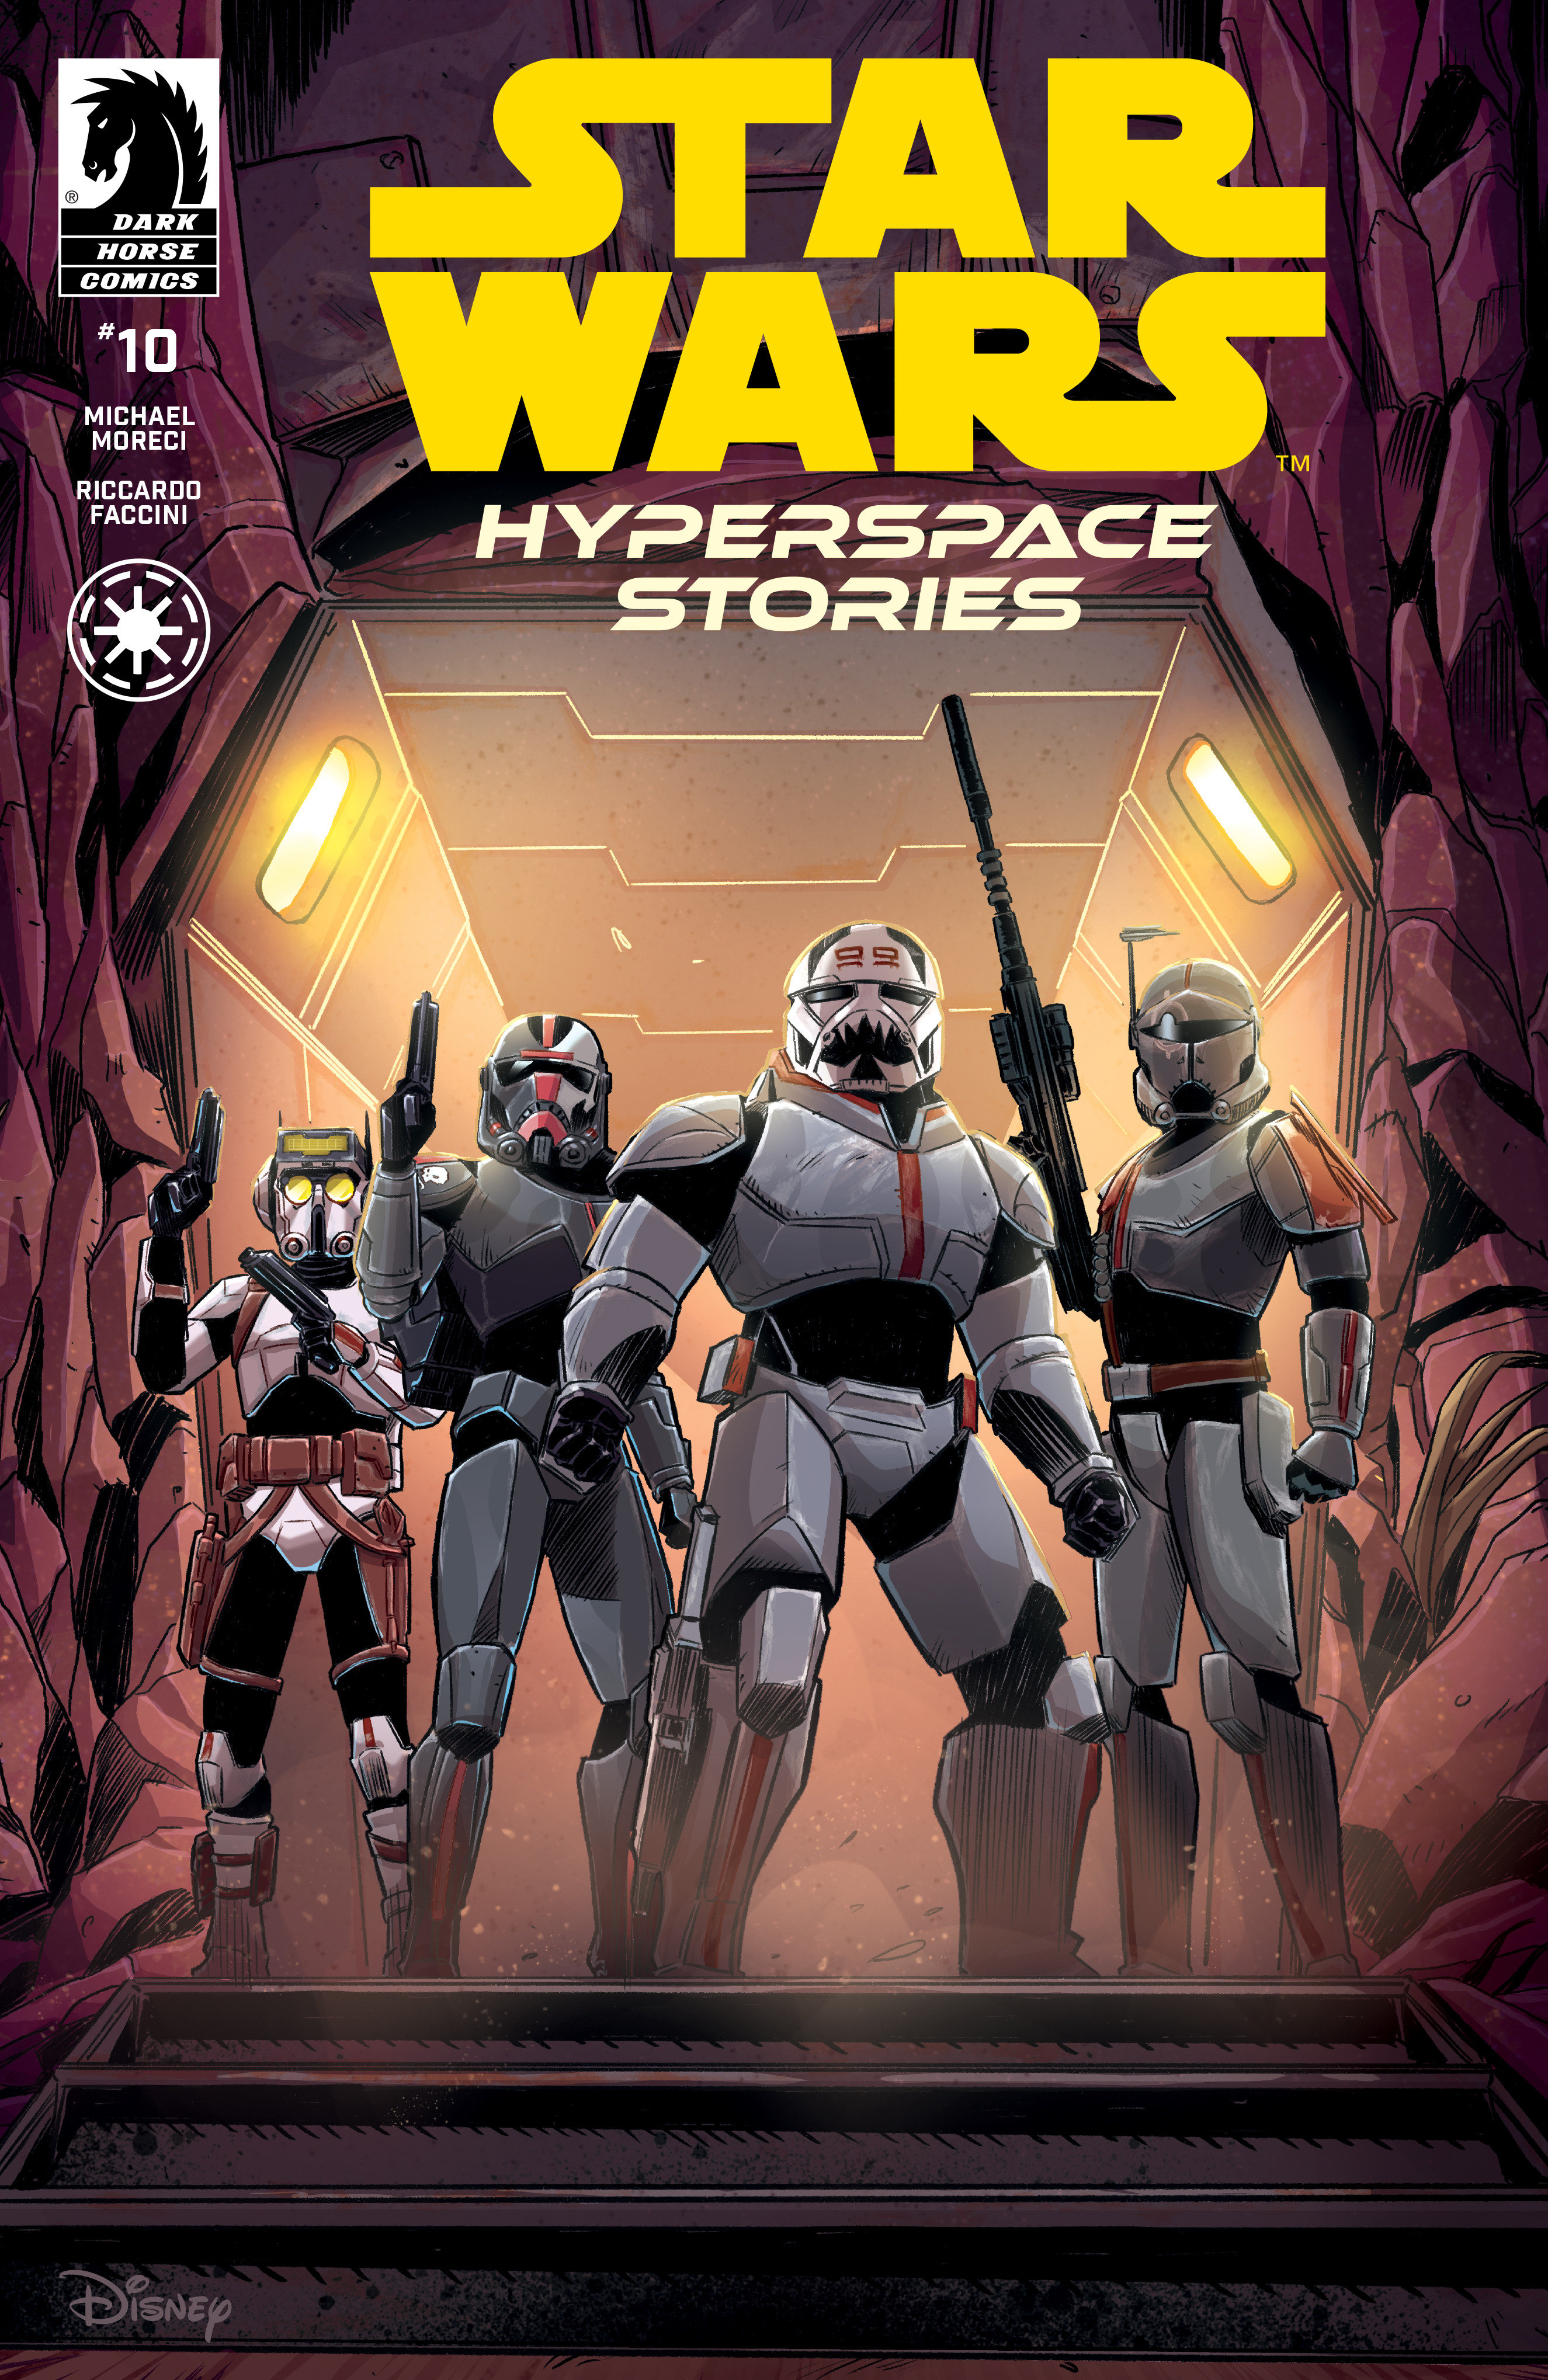 Star Wars: Hyperspace Stories #10 Cover A (Tom Fowler)